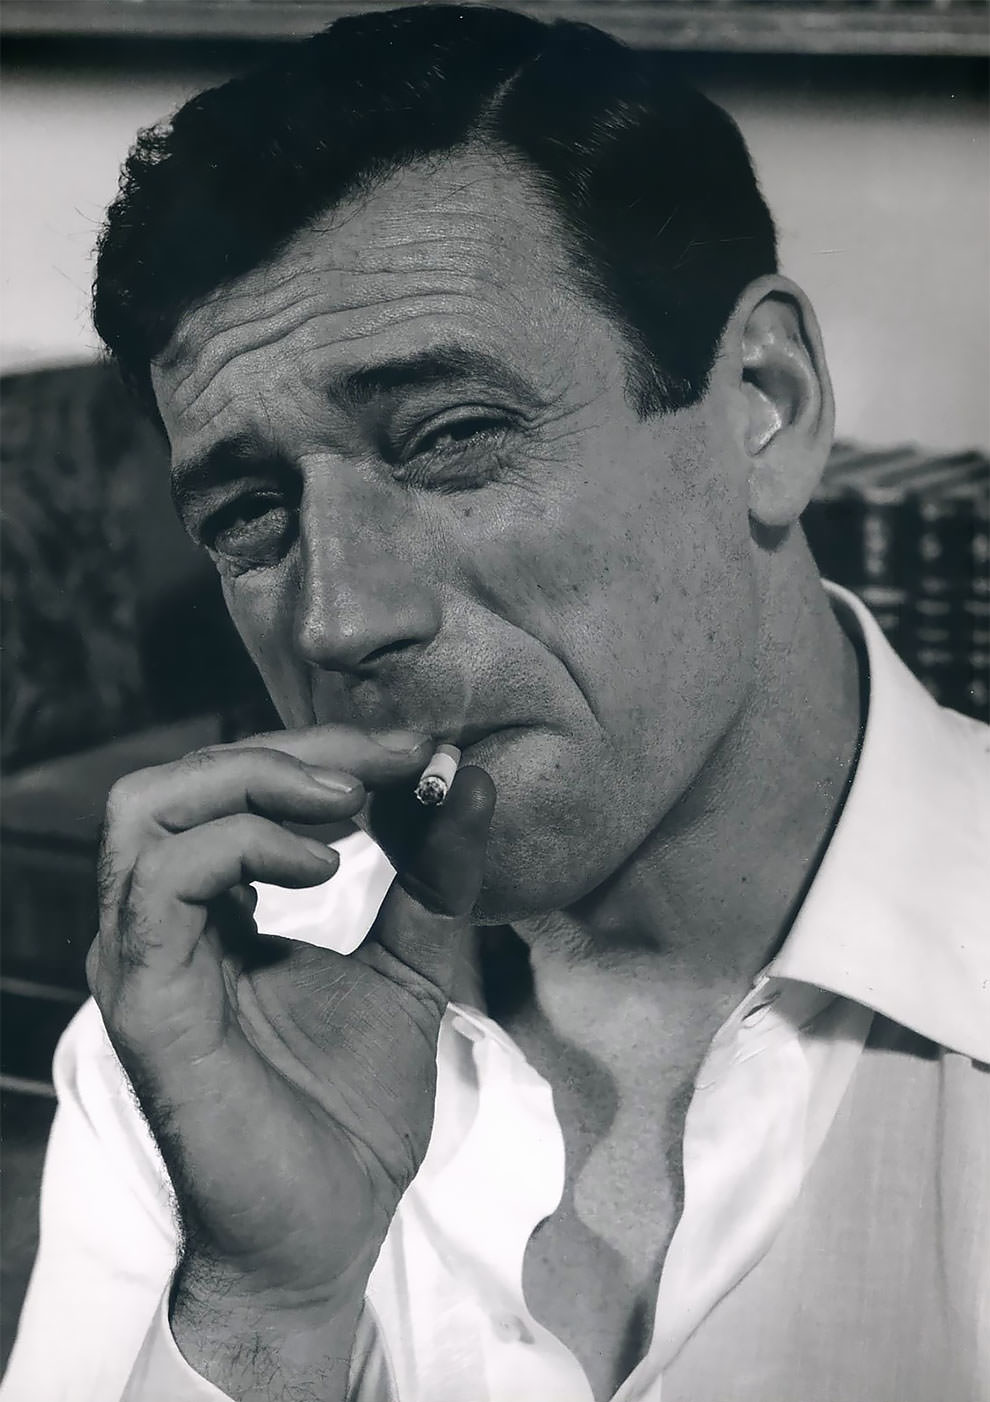 Italian-born French actor and singer Yves Montand. France, Paris, 1960.